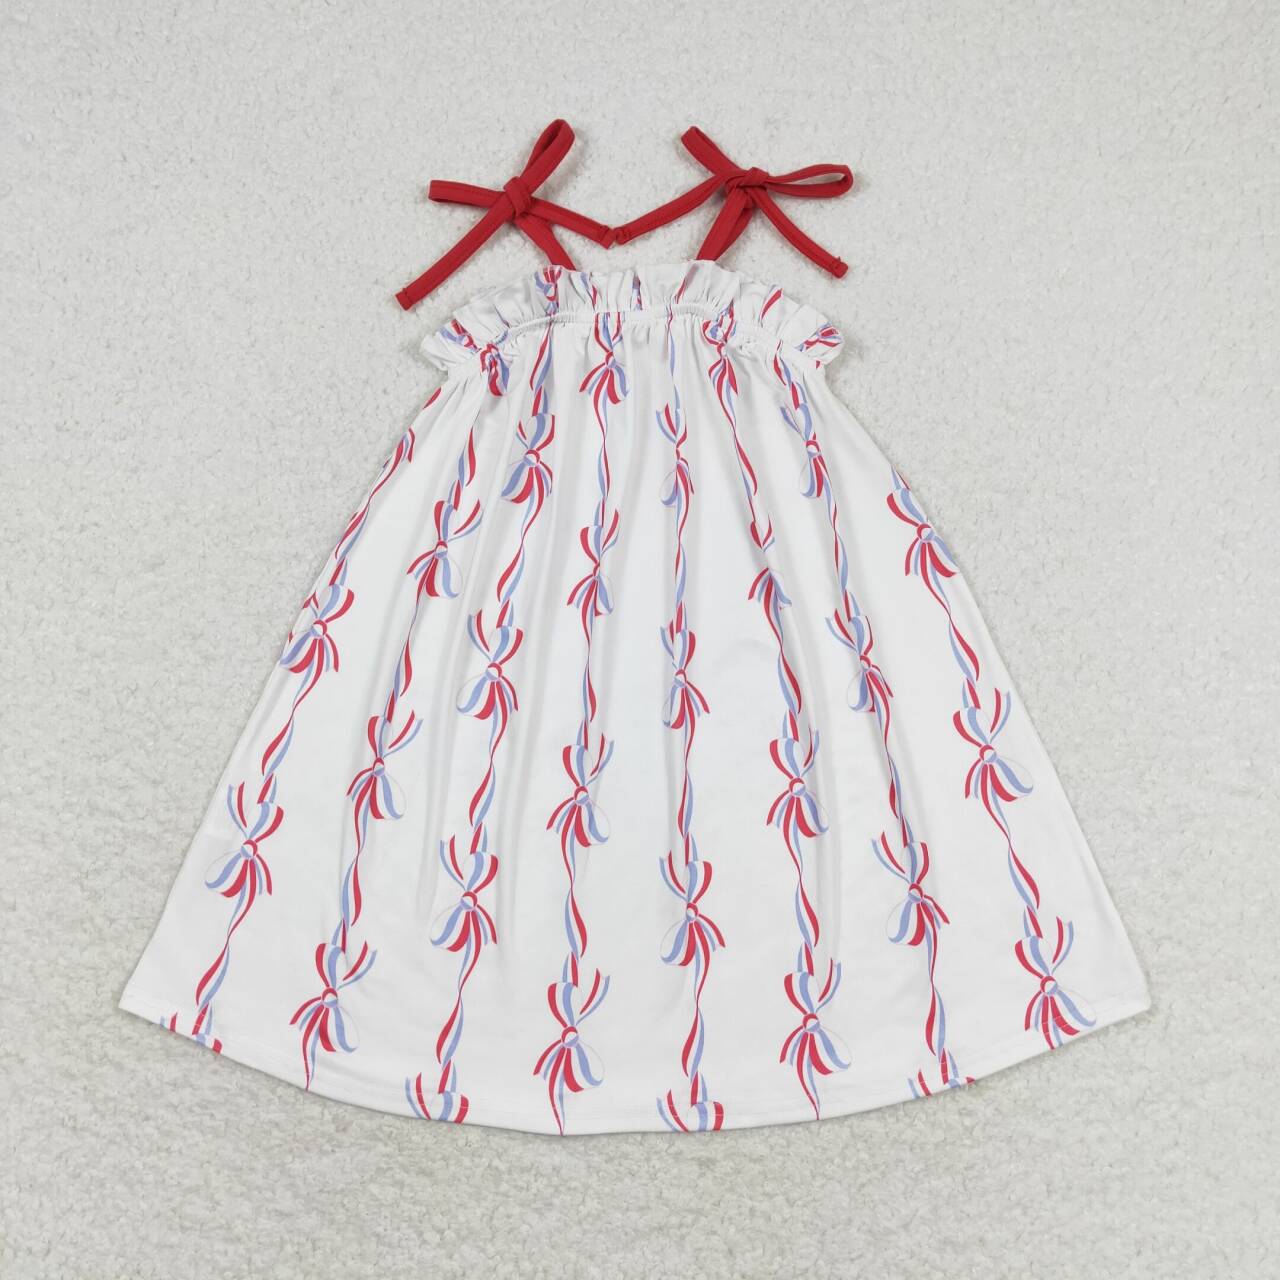 Baby Girls Patriotic Bow Sibling Outfit Dress and Romper July 4th